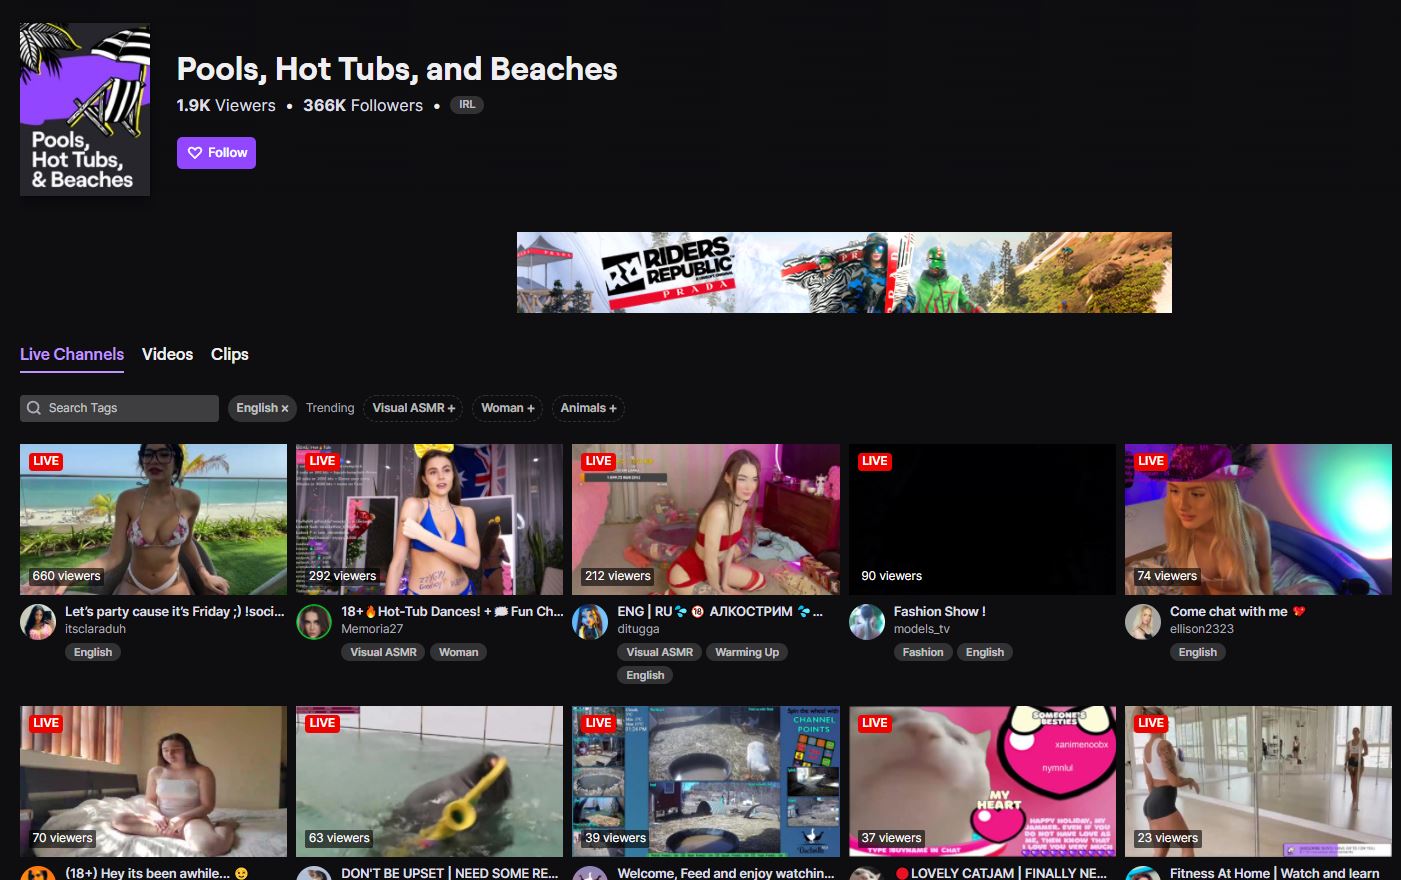 The hot tub section of Twitch